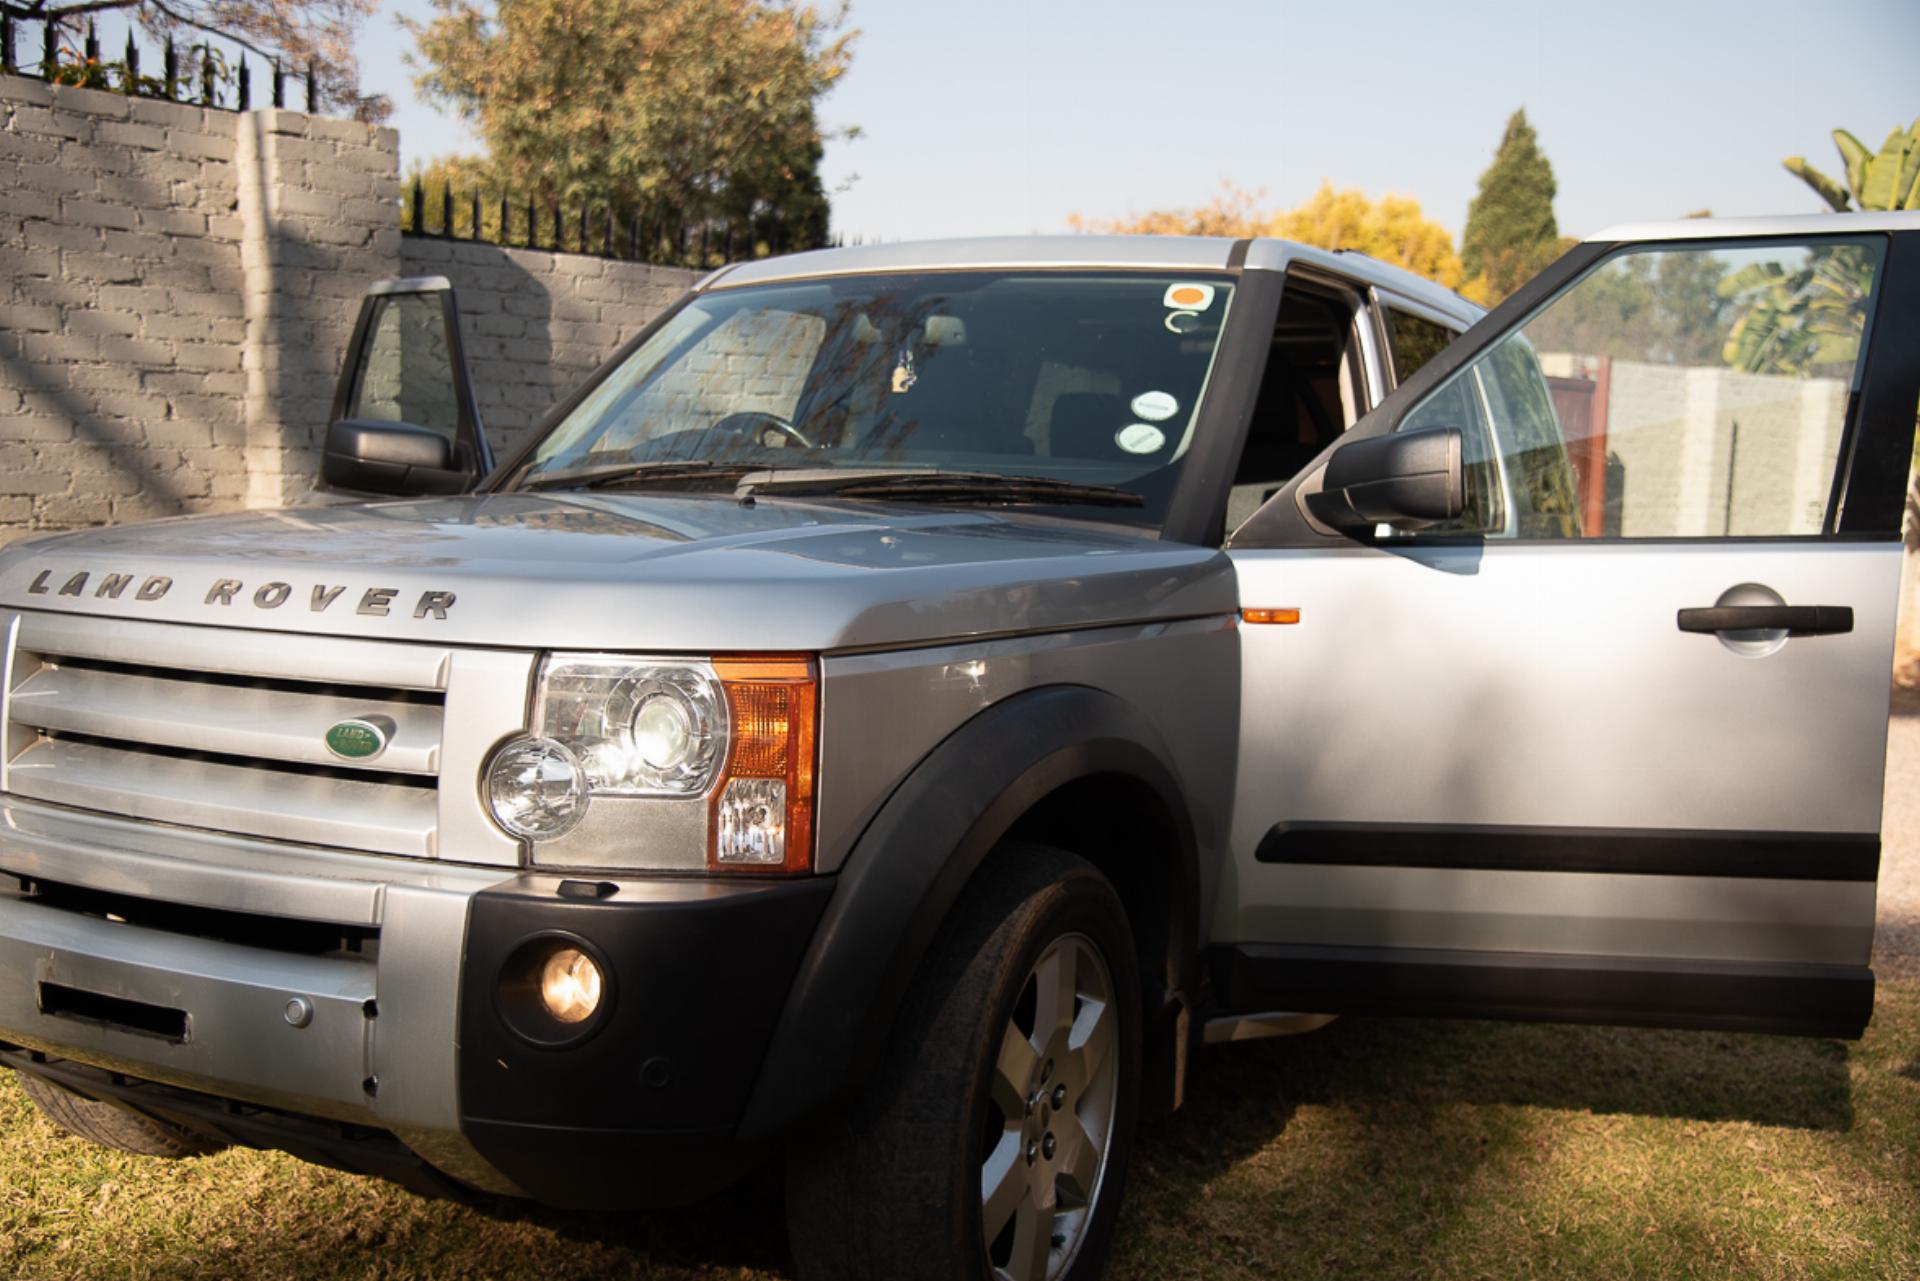 Used Land Rover Discovery 3 V8 Hse 2006 on auction